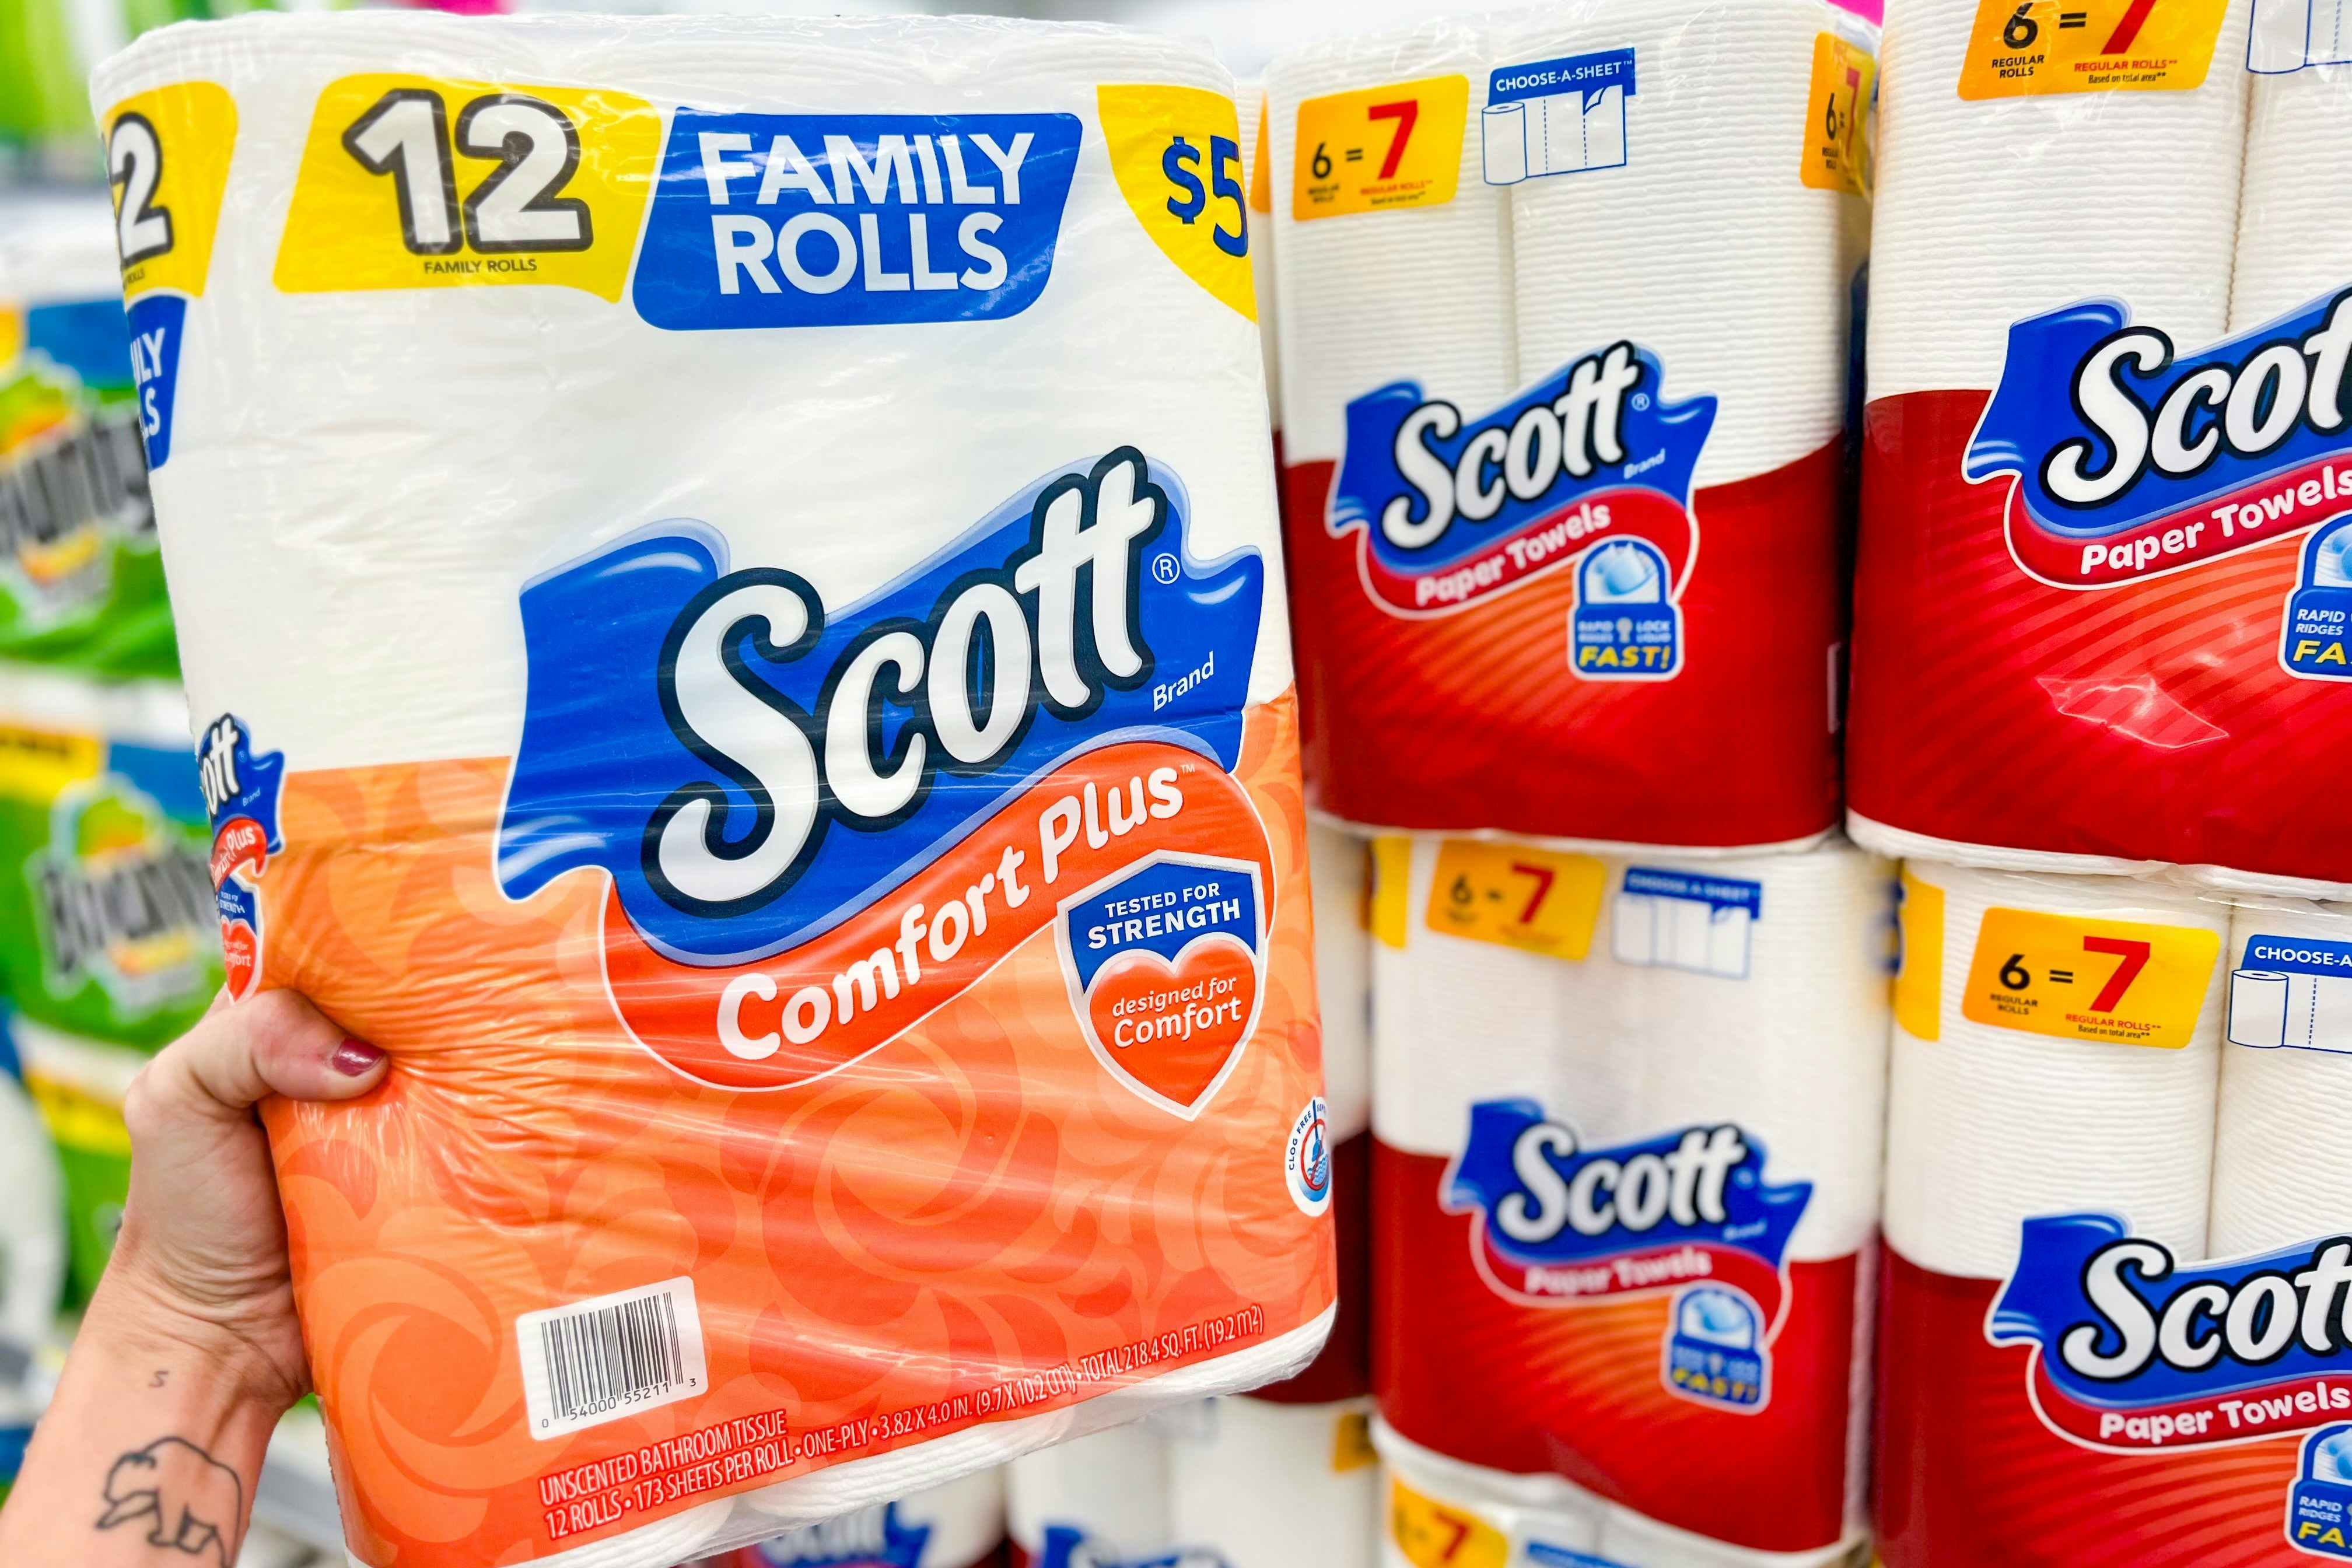 Scott Paper Towels and Toilet Paper, $2.50 Each at Walgreens